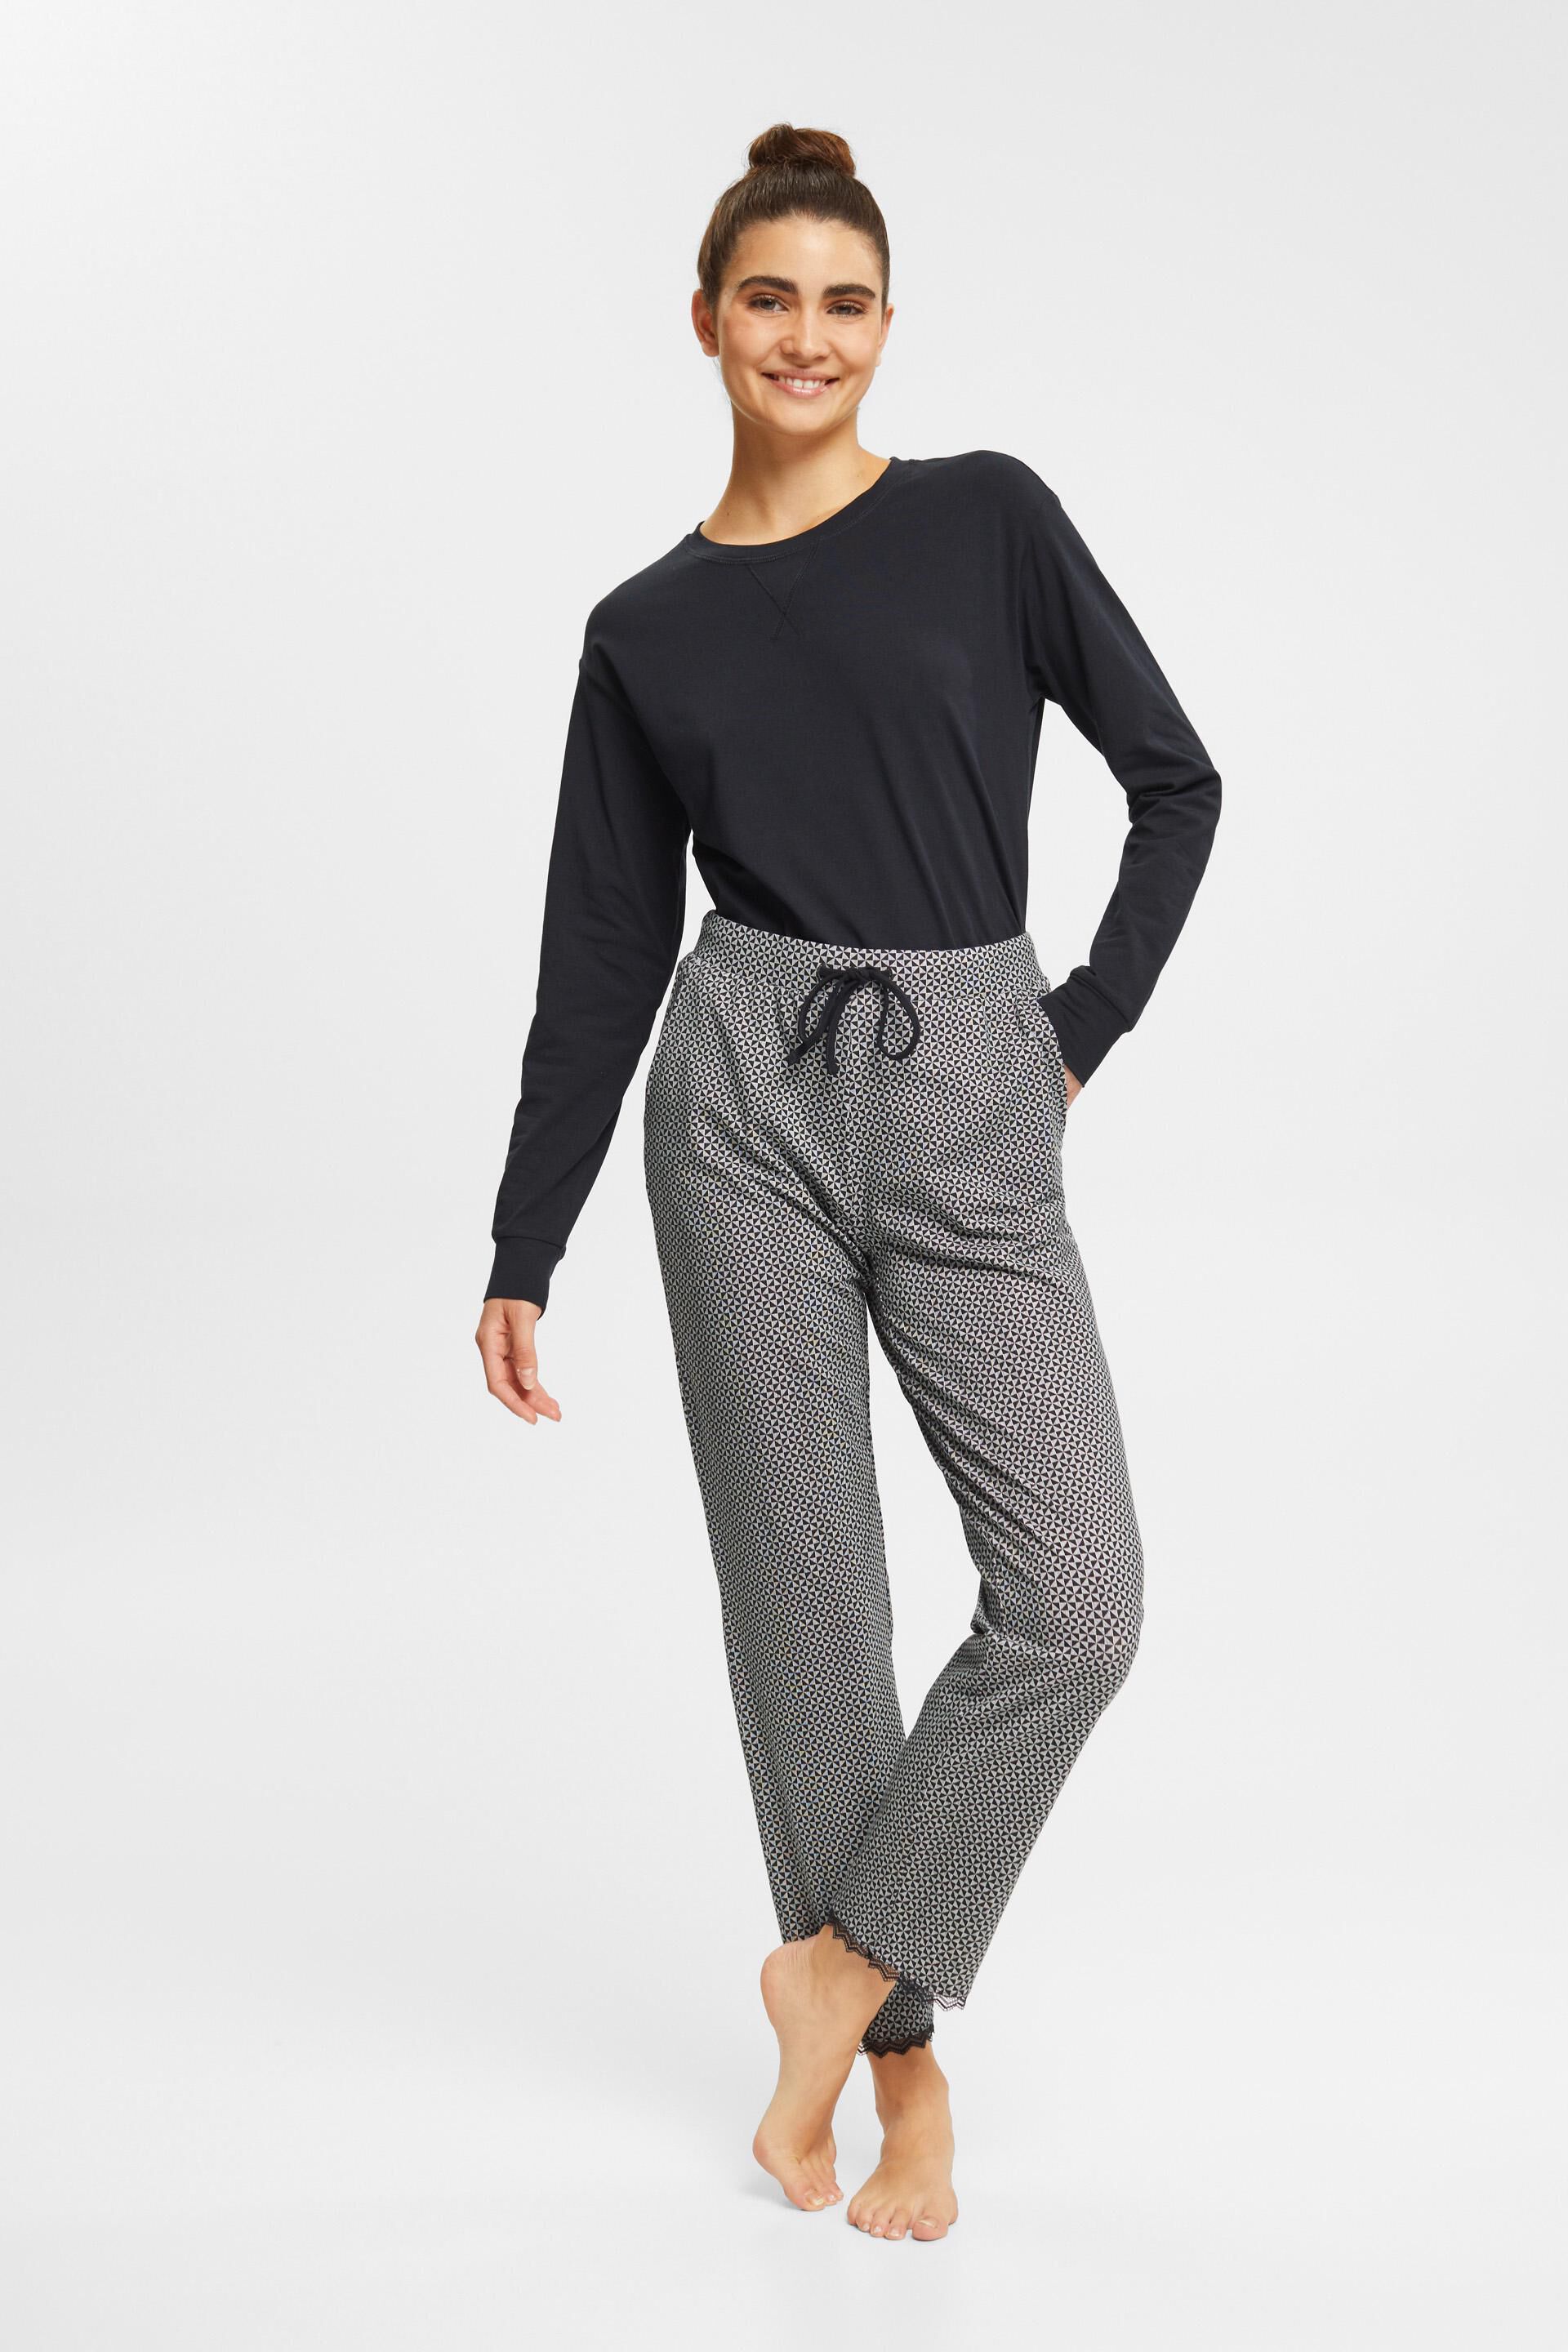 Esprit jersey with Printed trousers lace